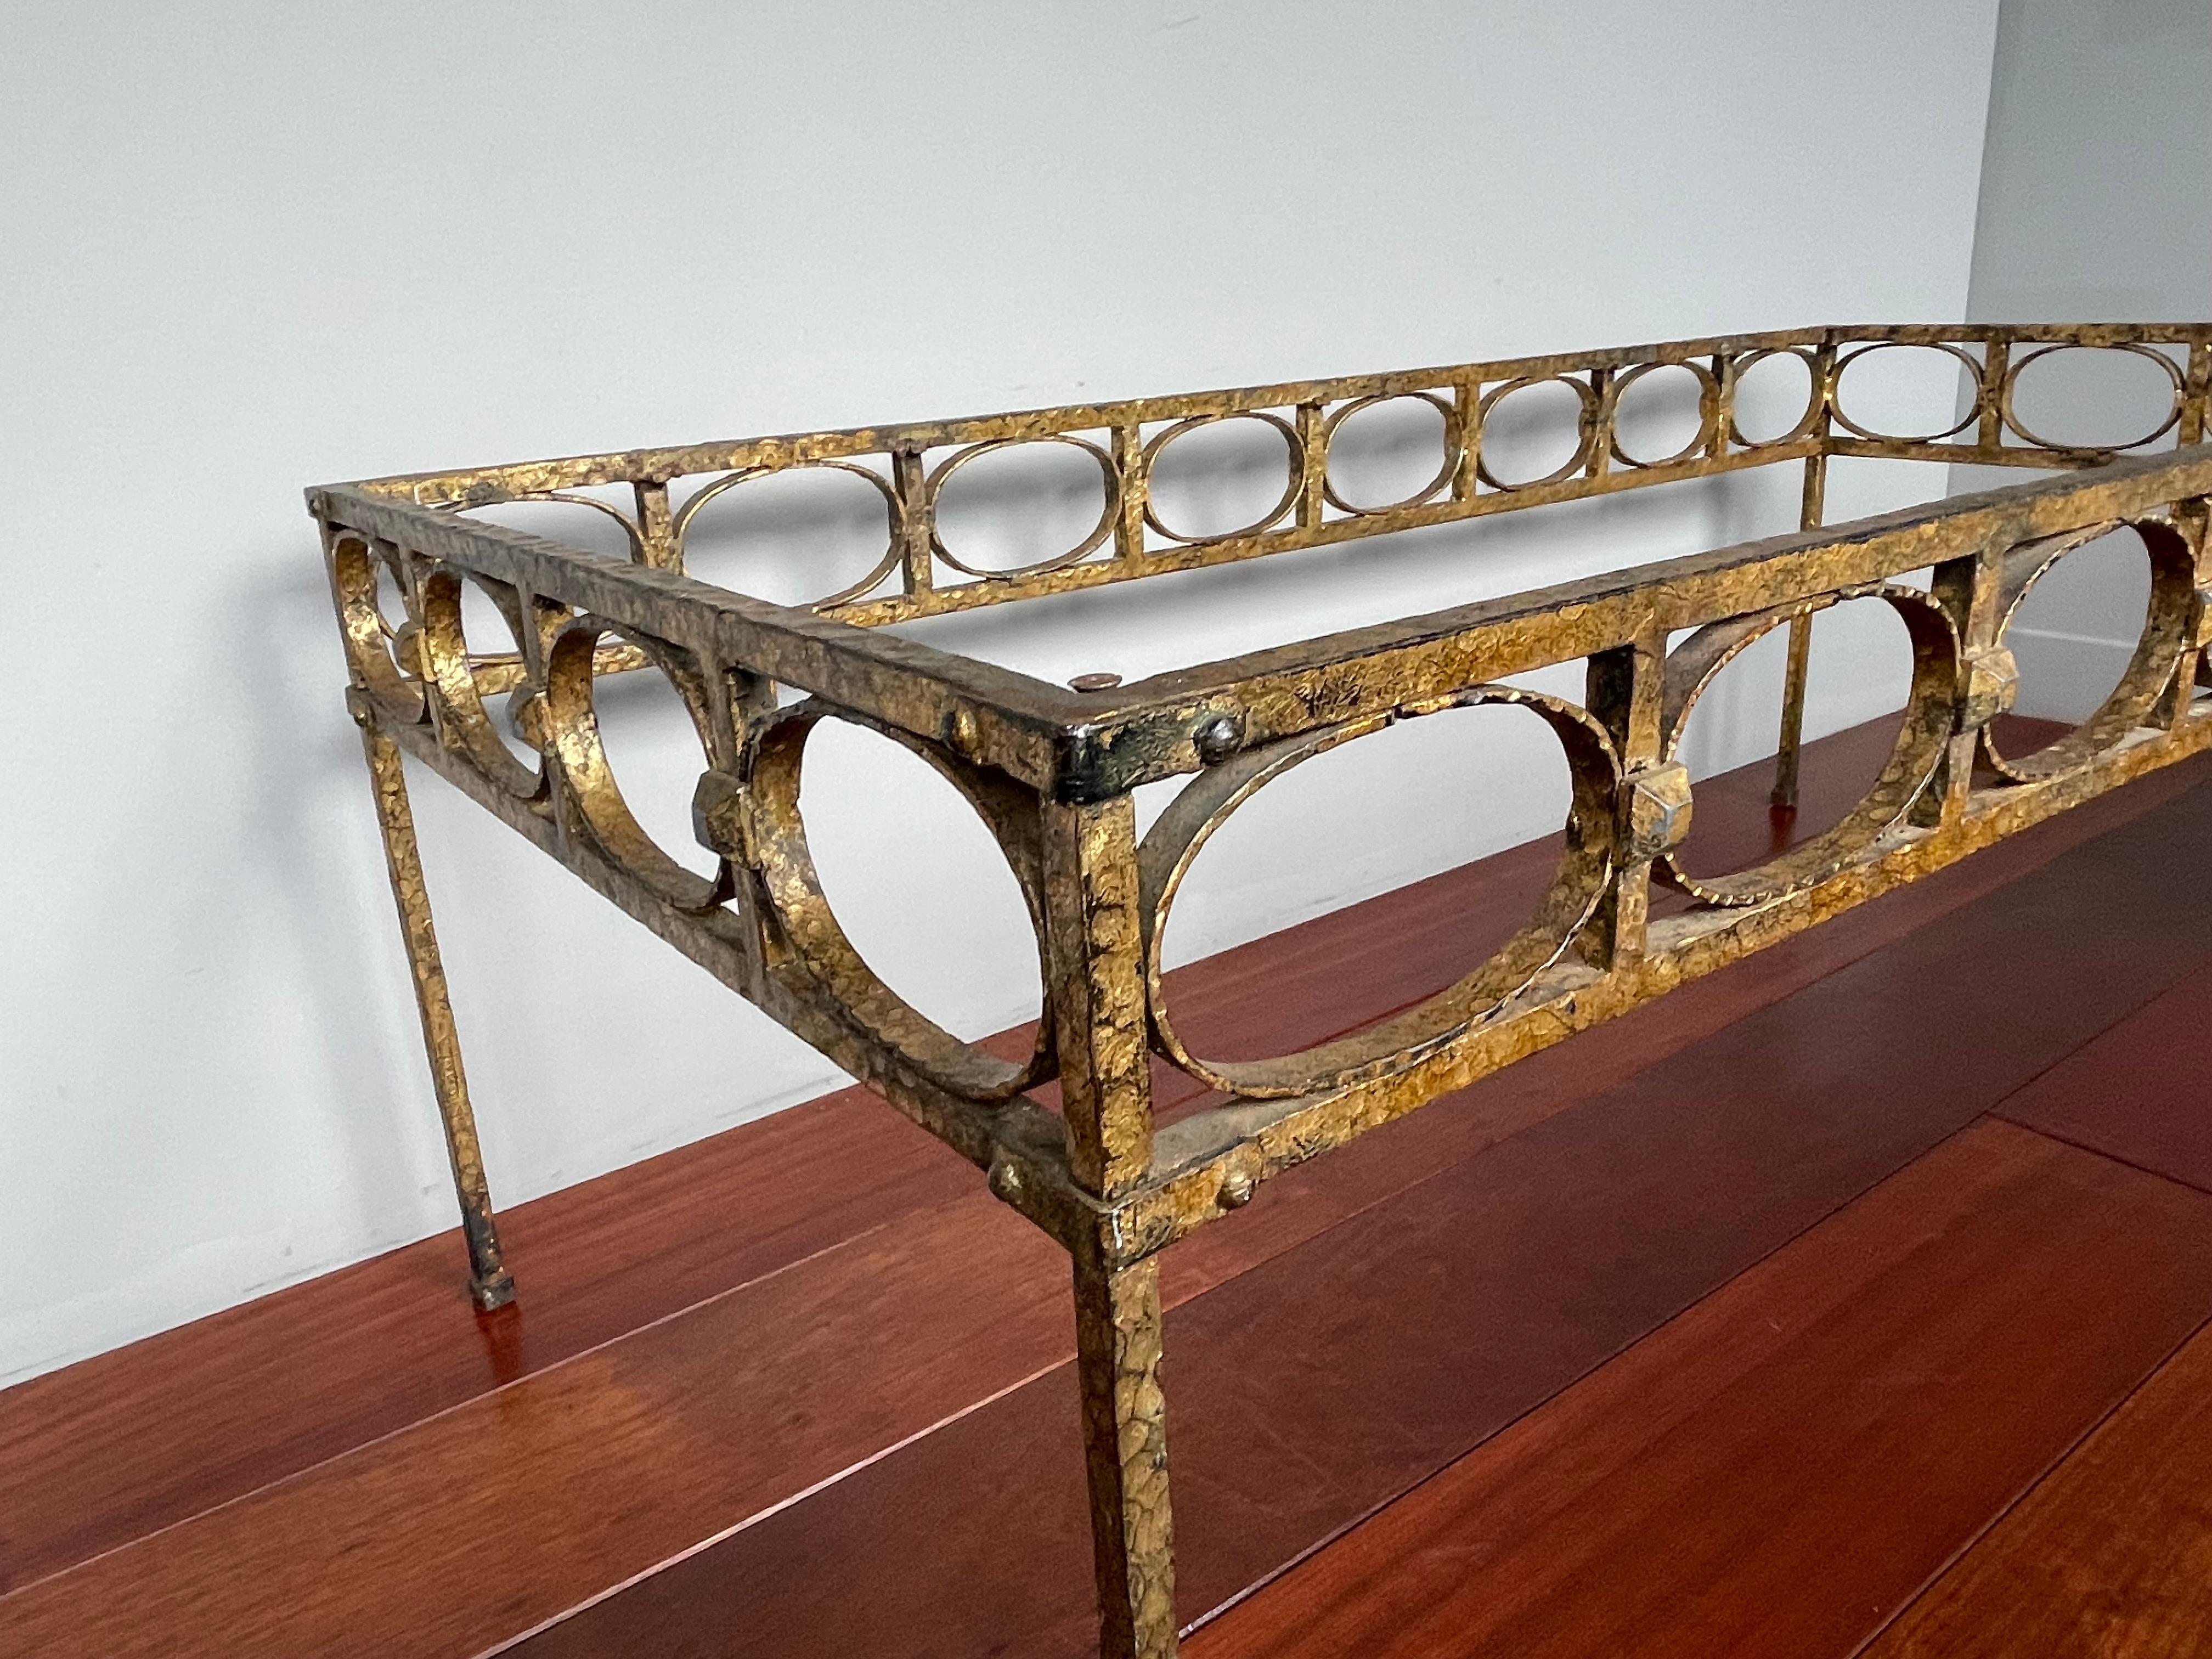 20th Century Stunning Midcentury Modern Gilt Wrought Iron Coffee Table Base by Ferro Art 1950 For Sale